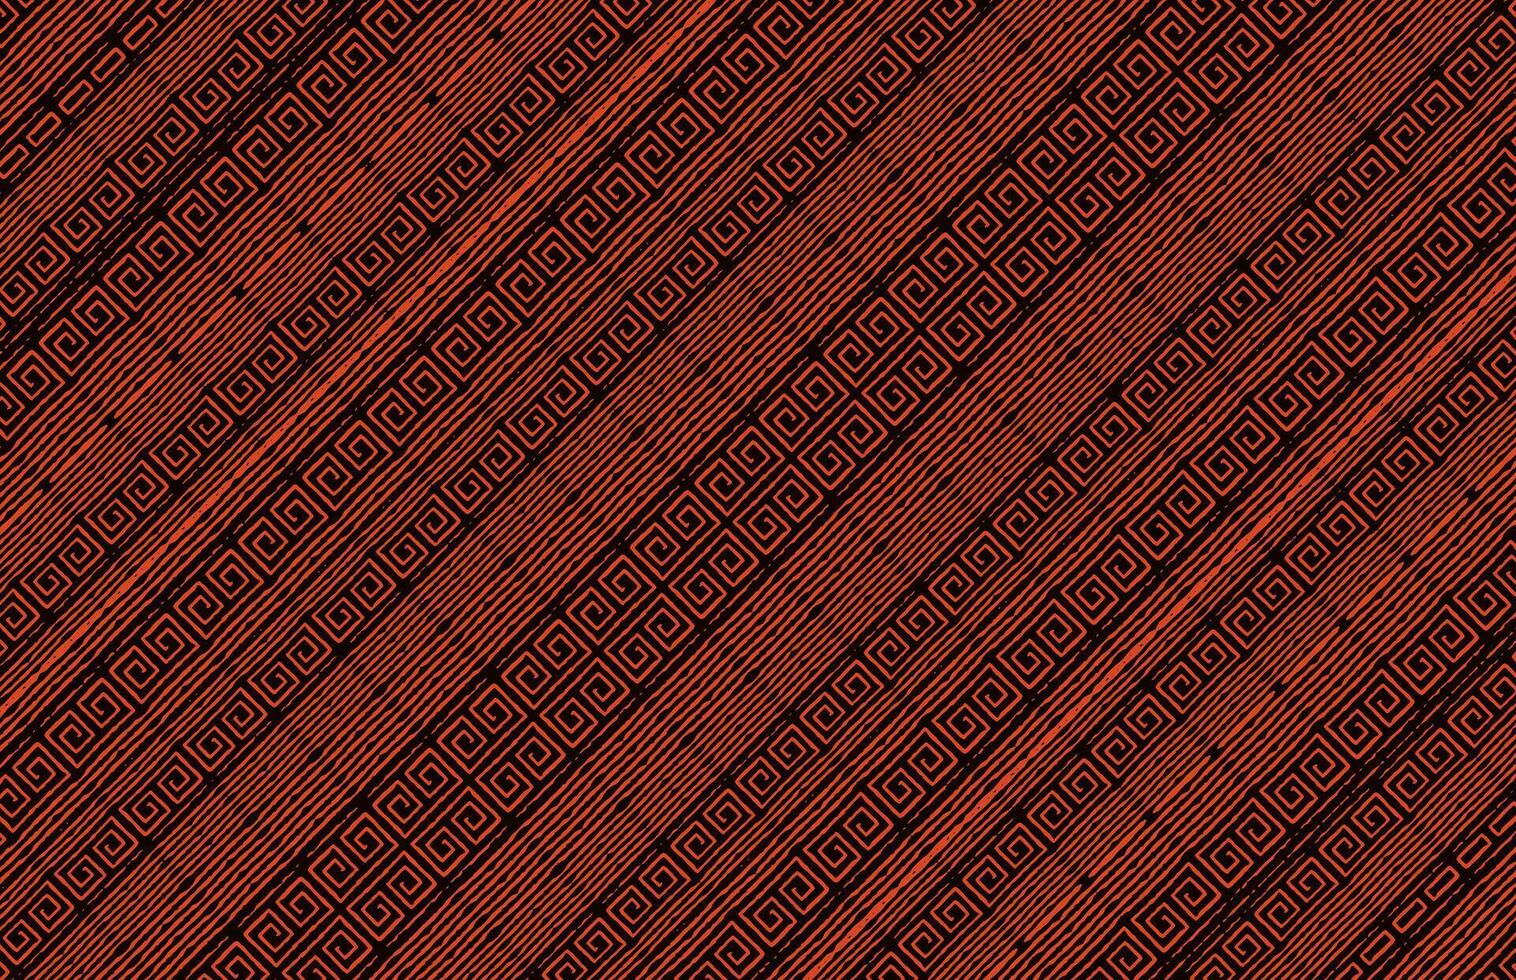 Tribal seamless brown fabric pattern vector